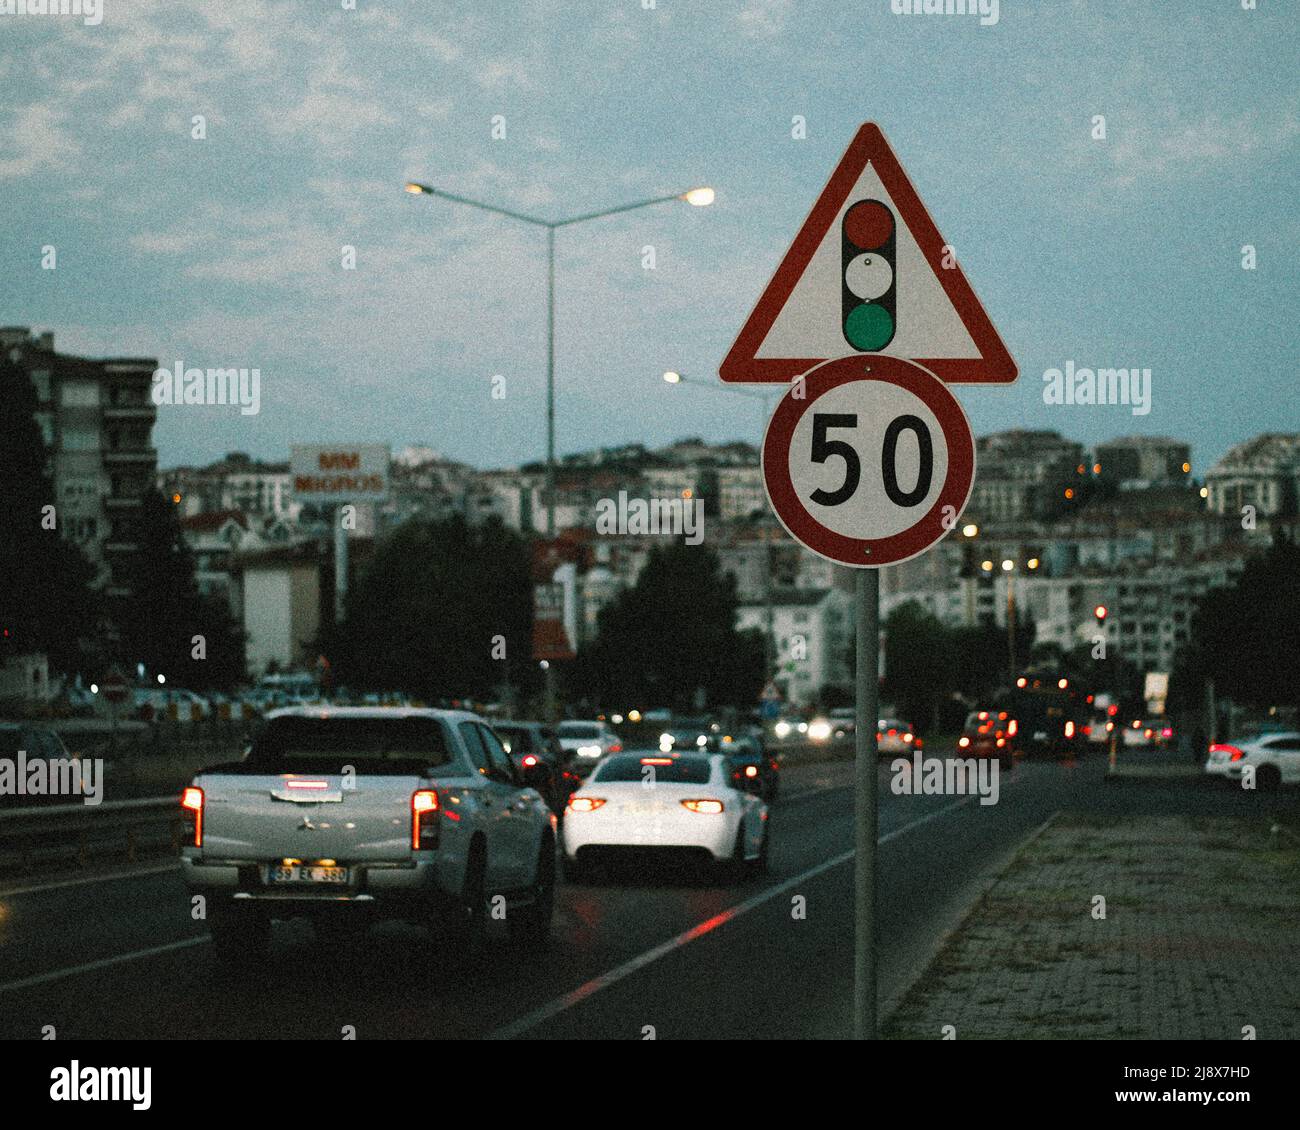 Traffic sign, speed limit of 50 Stock Photo